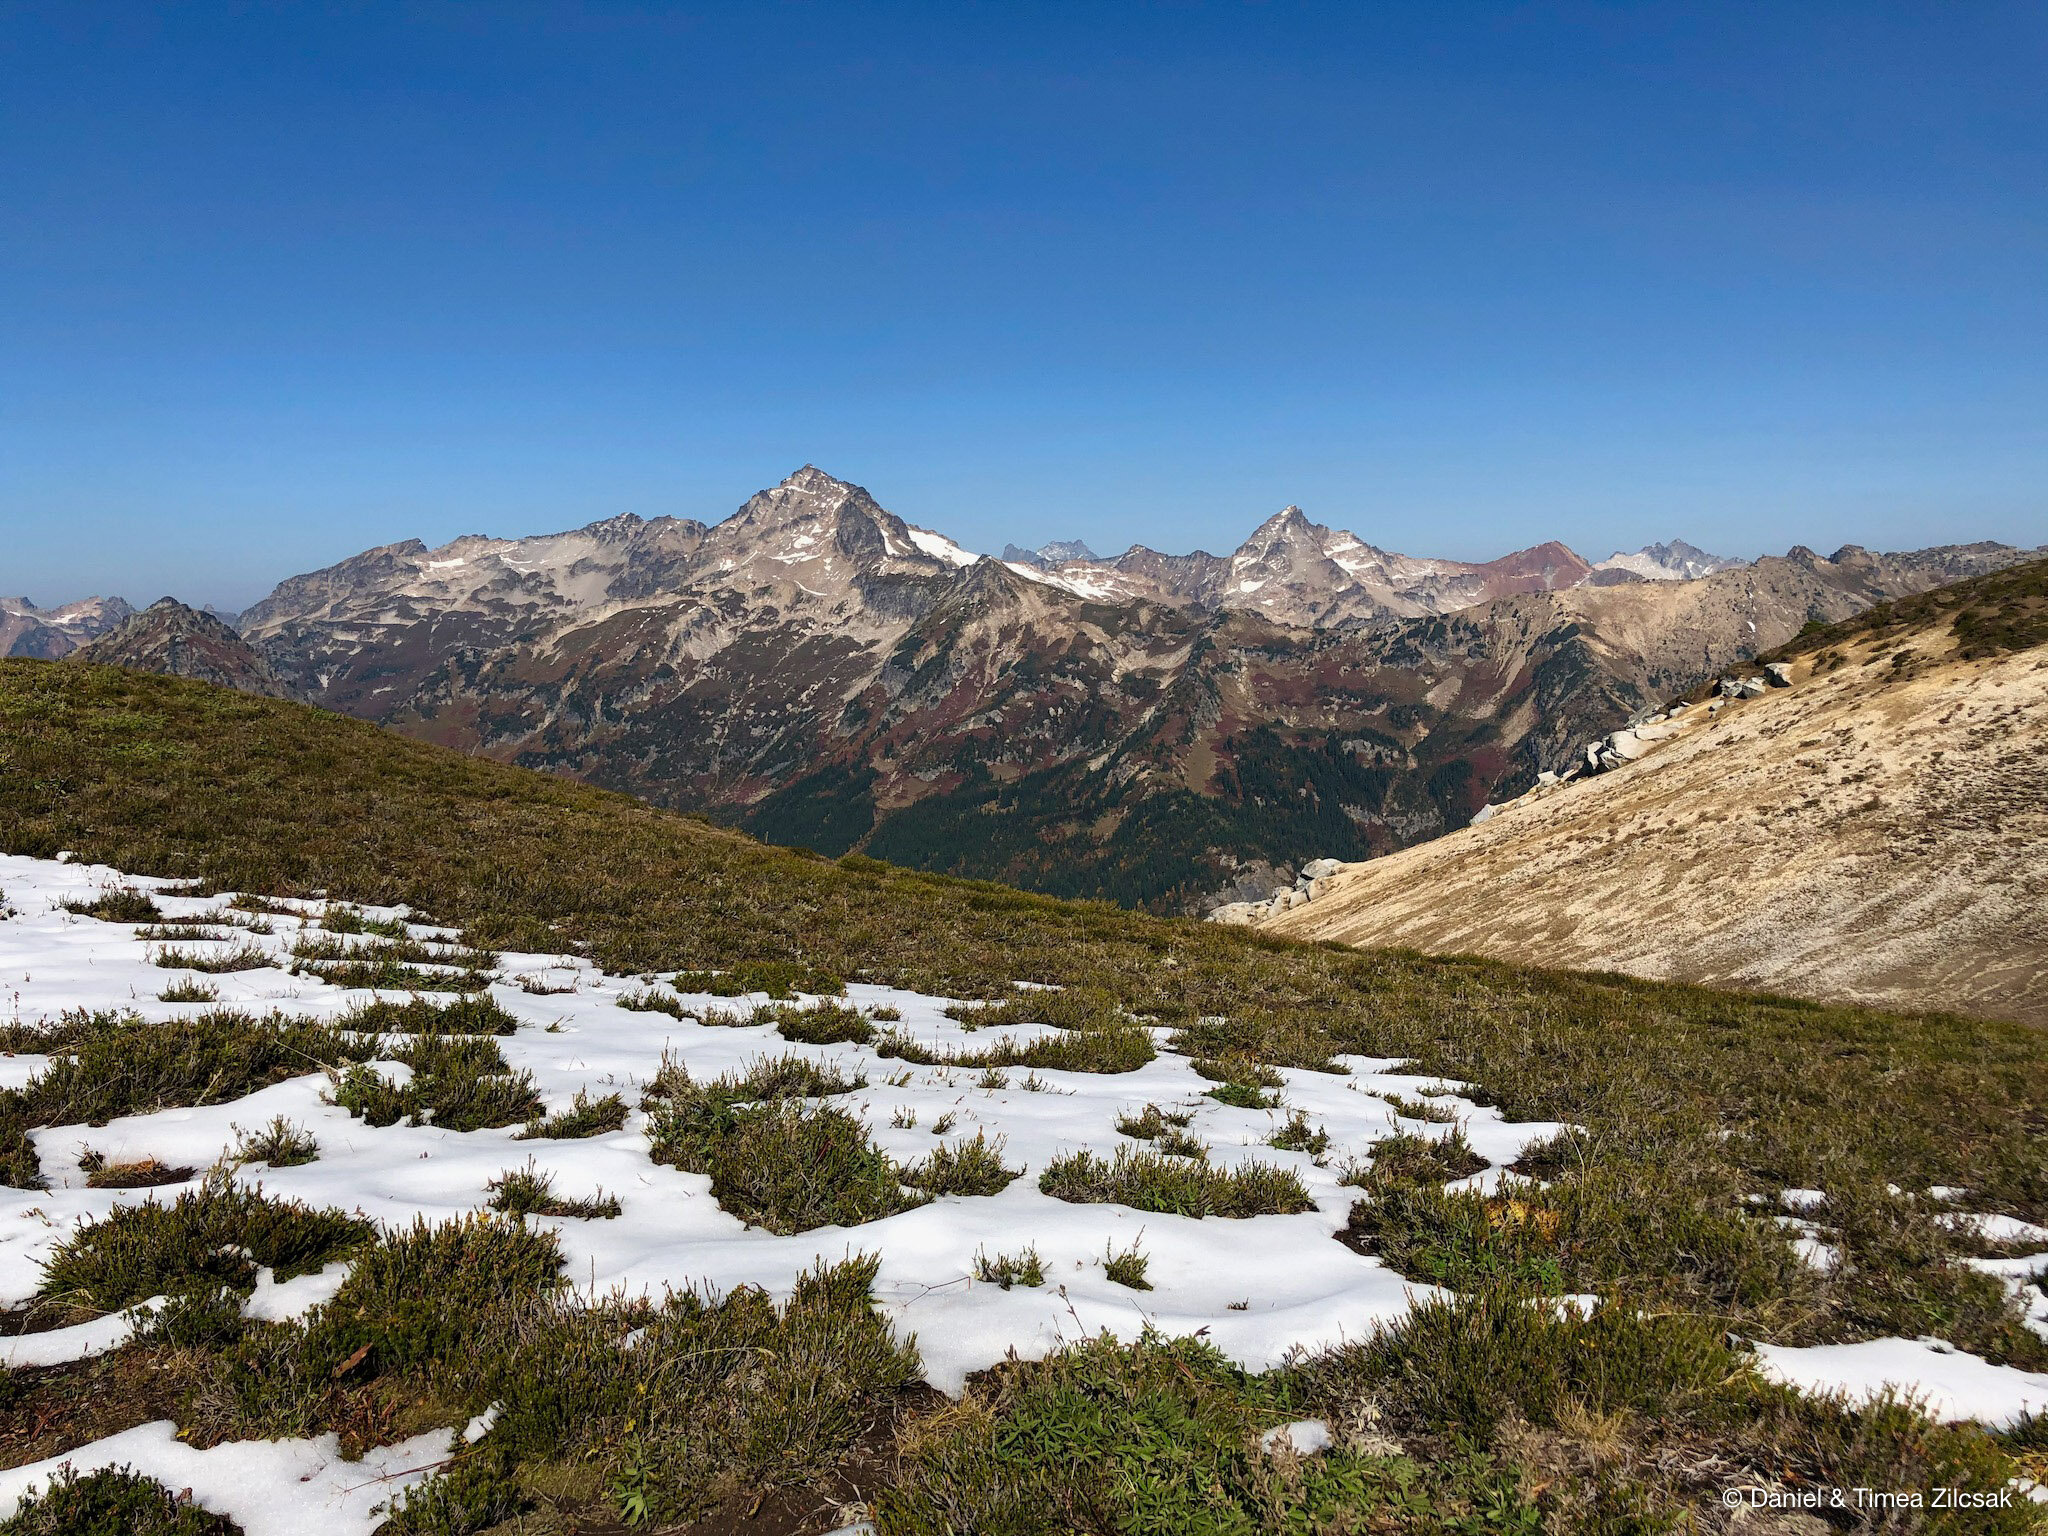 Fortress Mountain, Chiwawa Mountain and Red Mountain seen from the trail towards High Pass